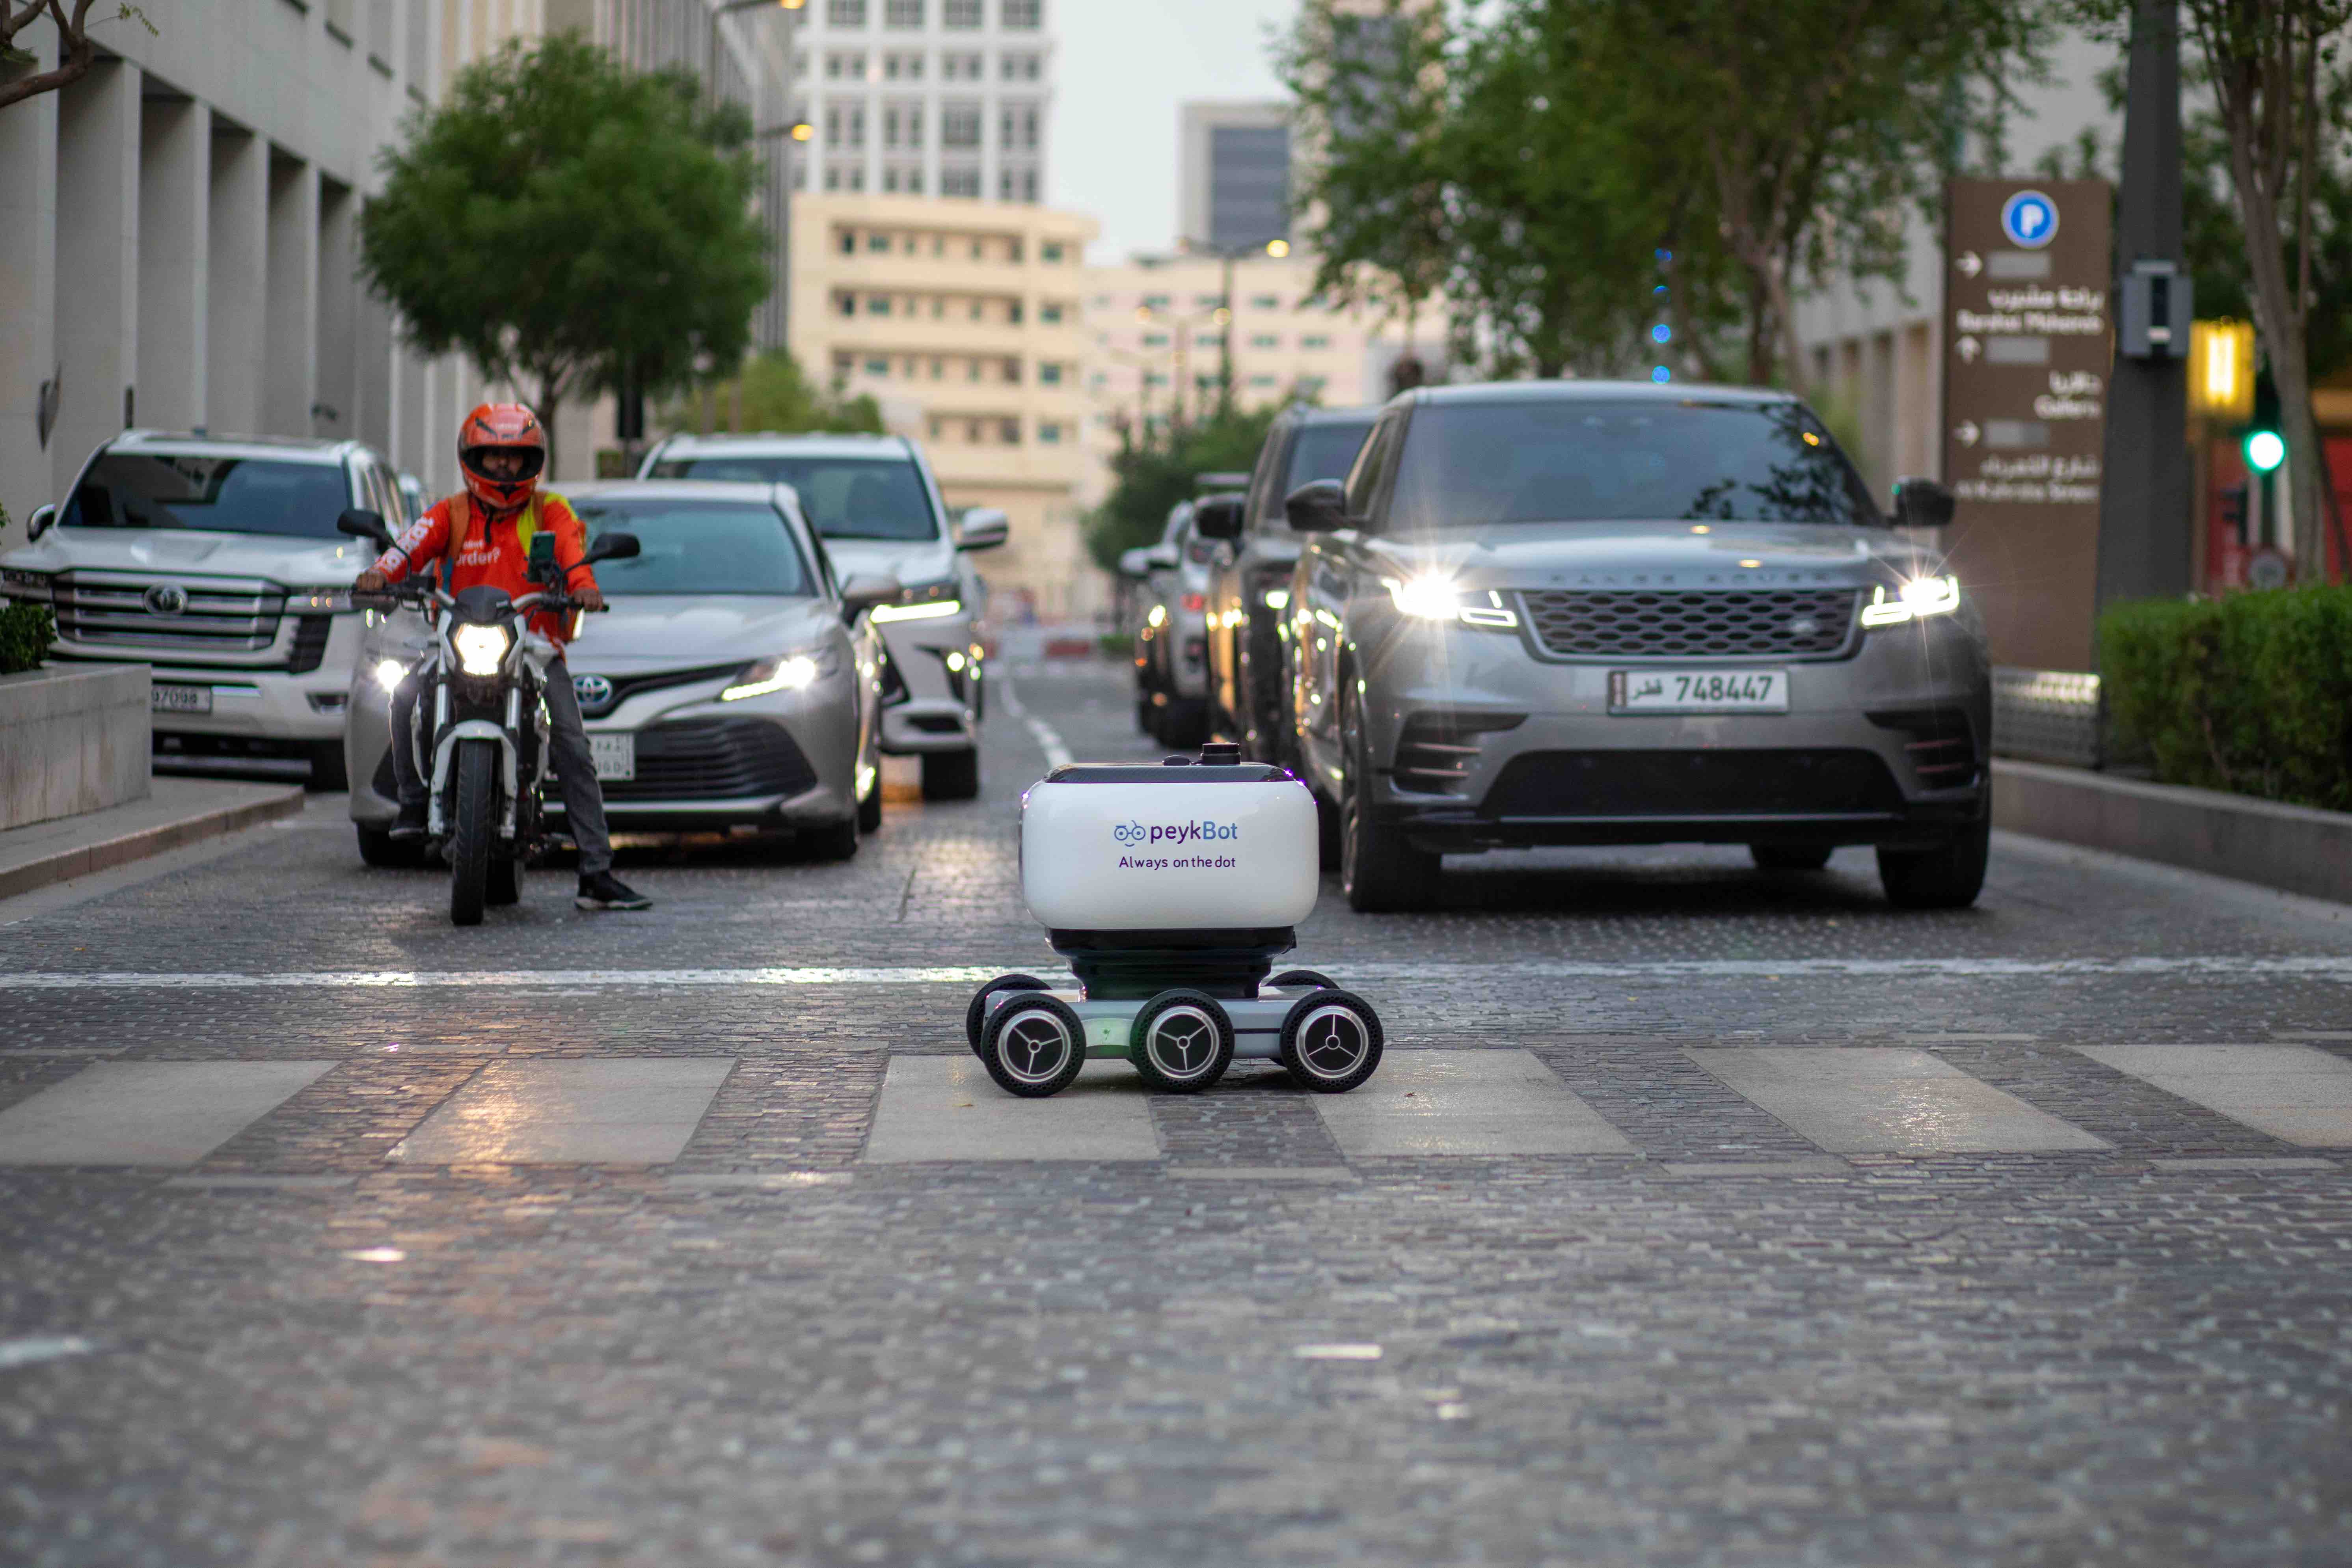 Peykbot delivery robot